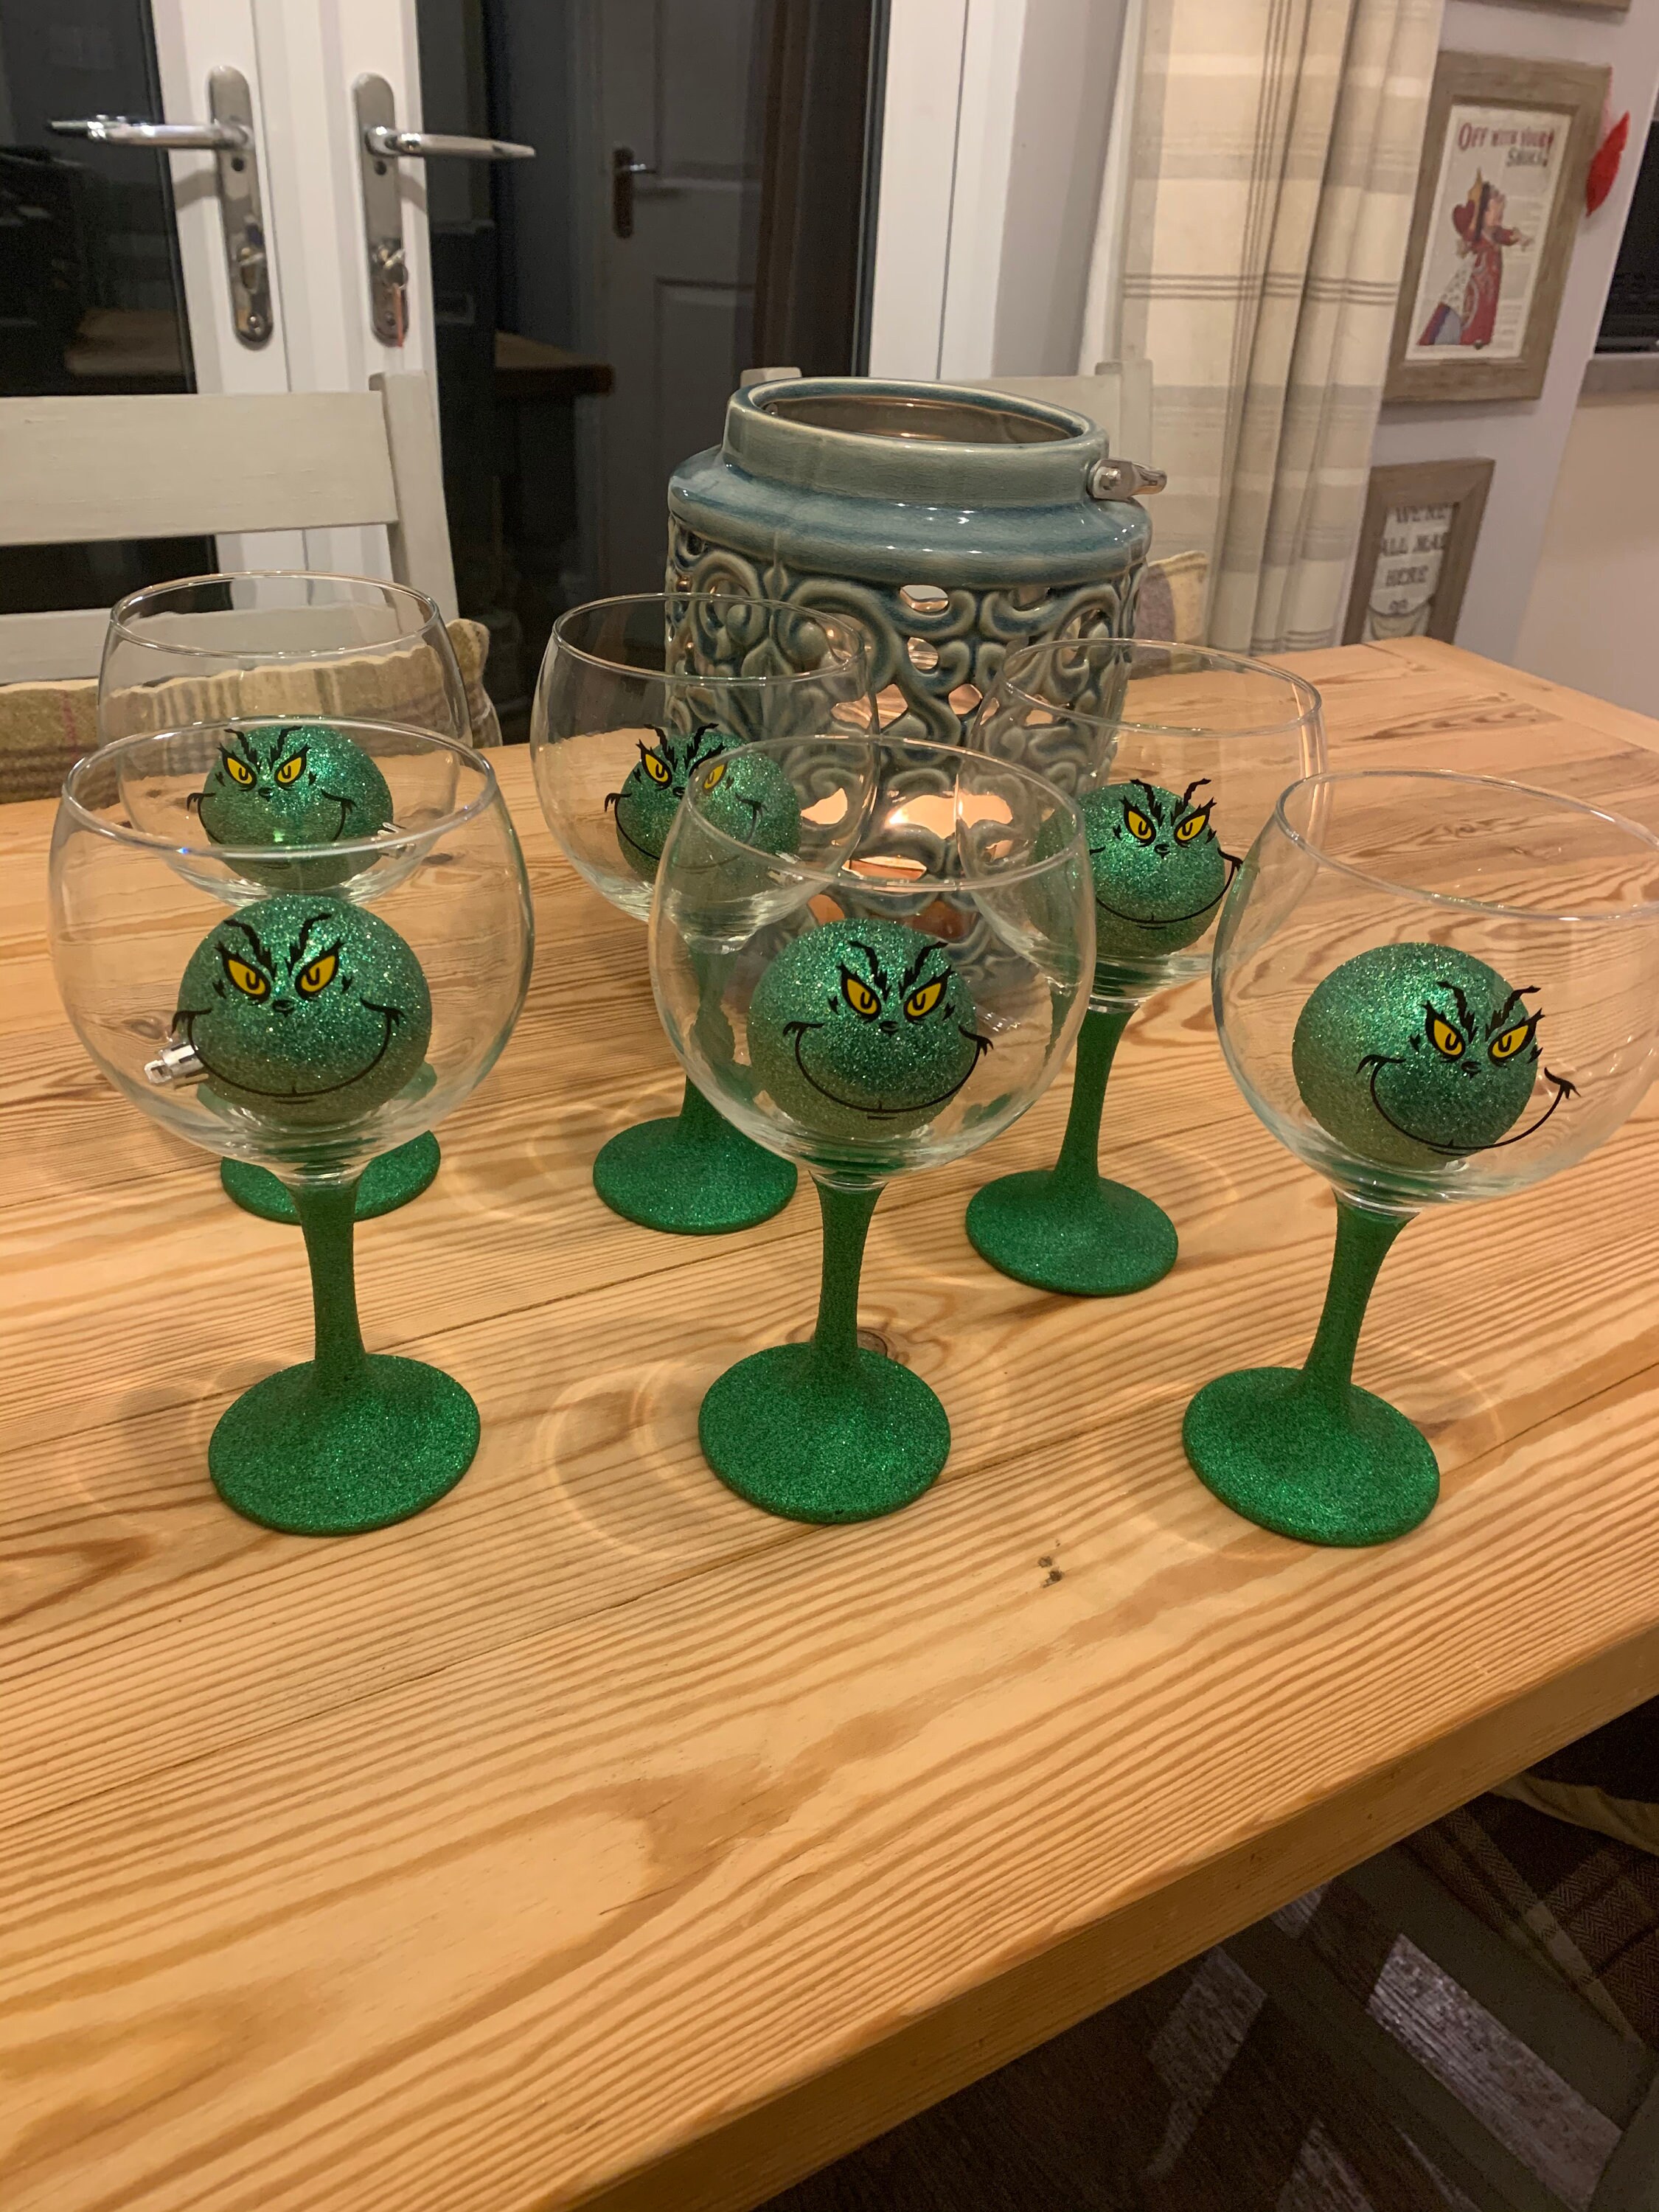 The Grinch (Miscellaneouos) Glassware Tall Tumbler by Disney